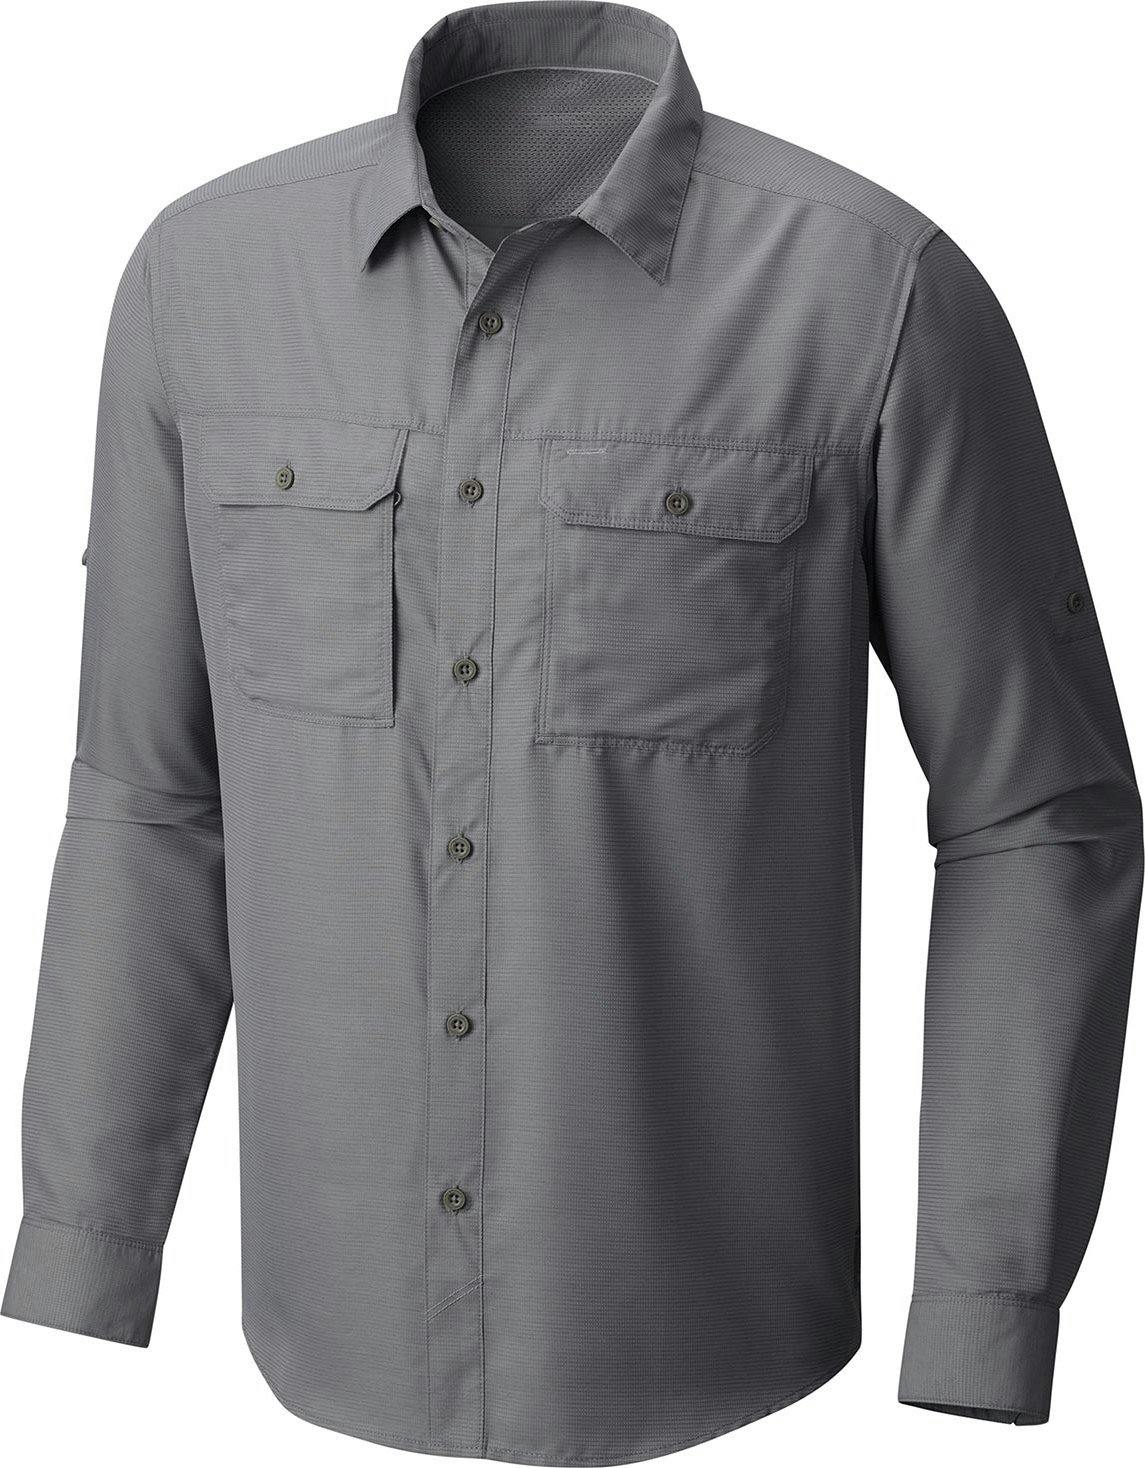 Product image for Canyon Long Sleeve Shirt - Men's